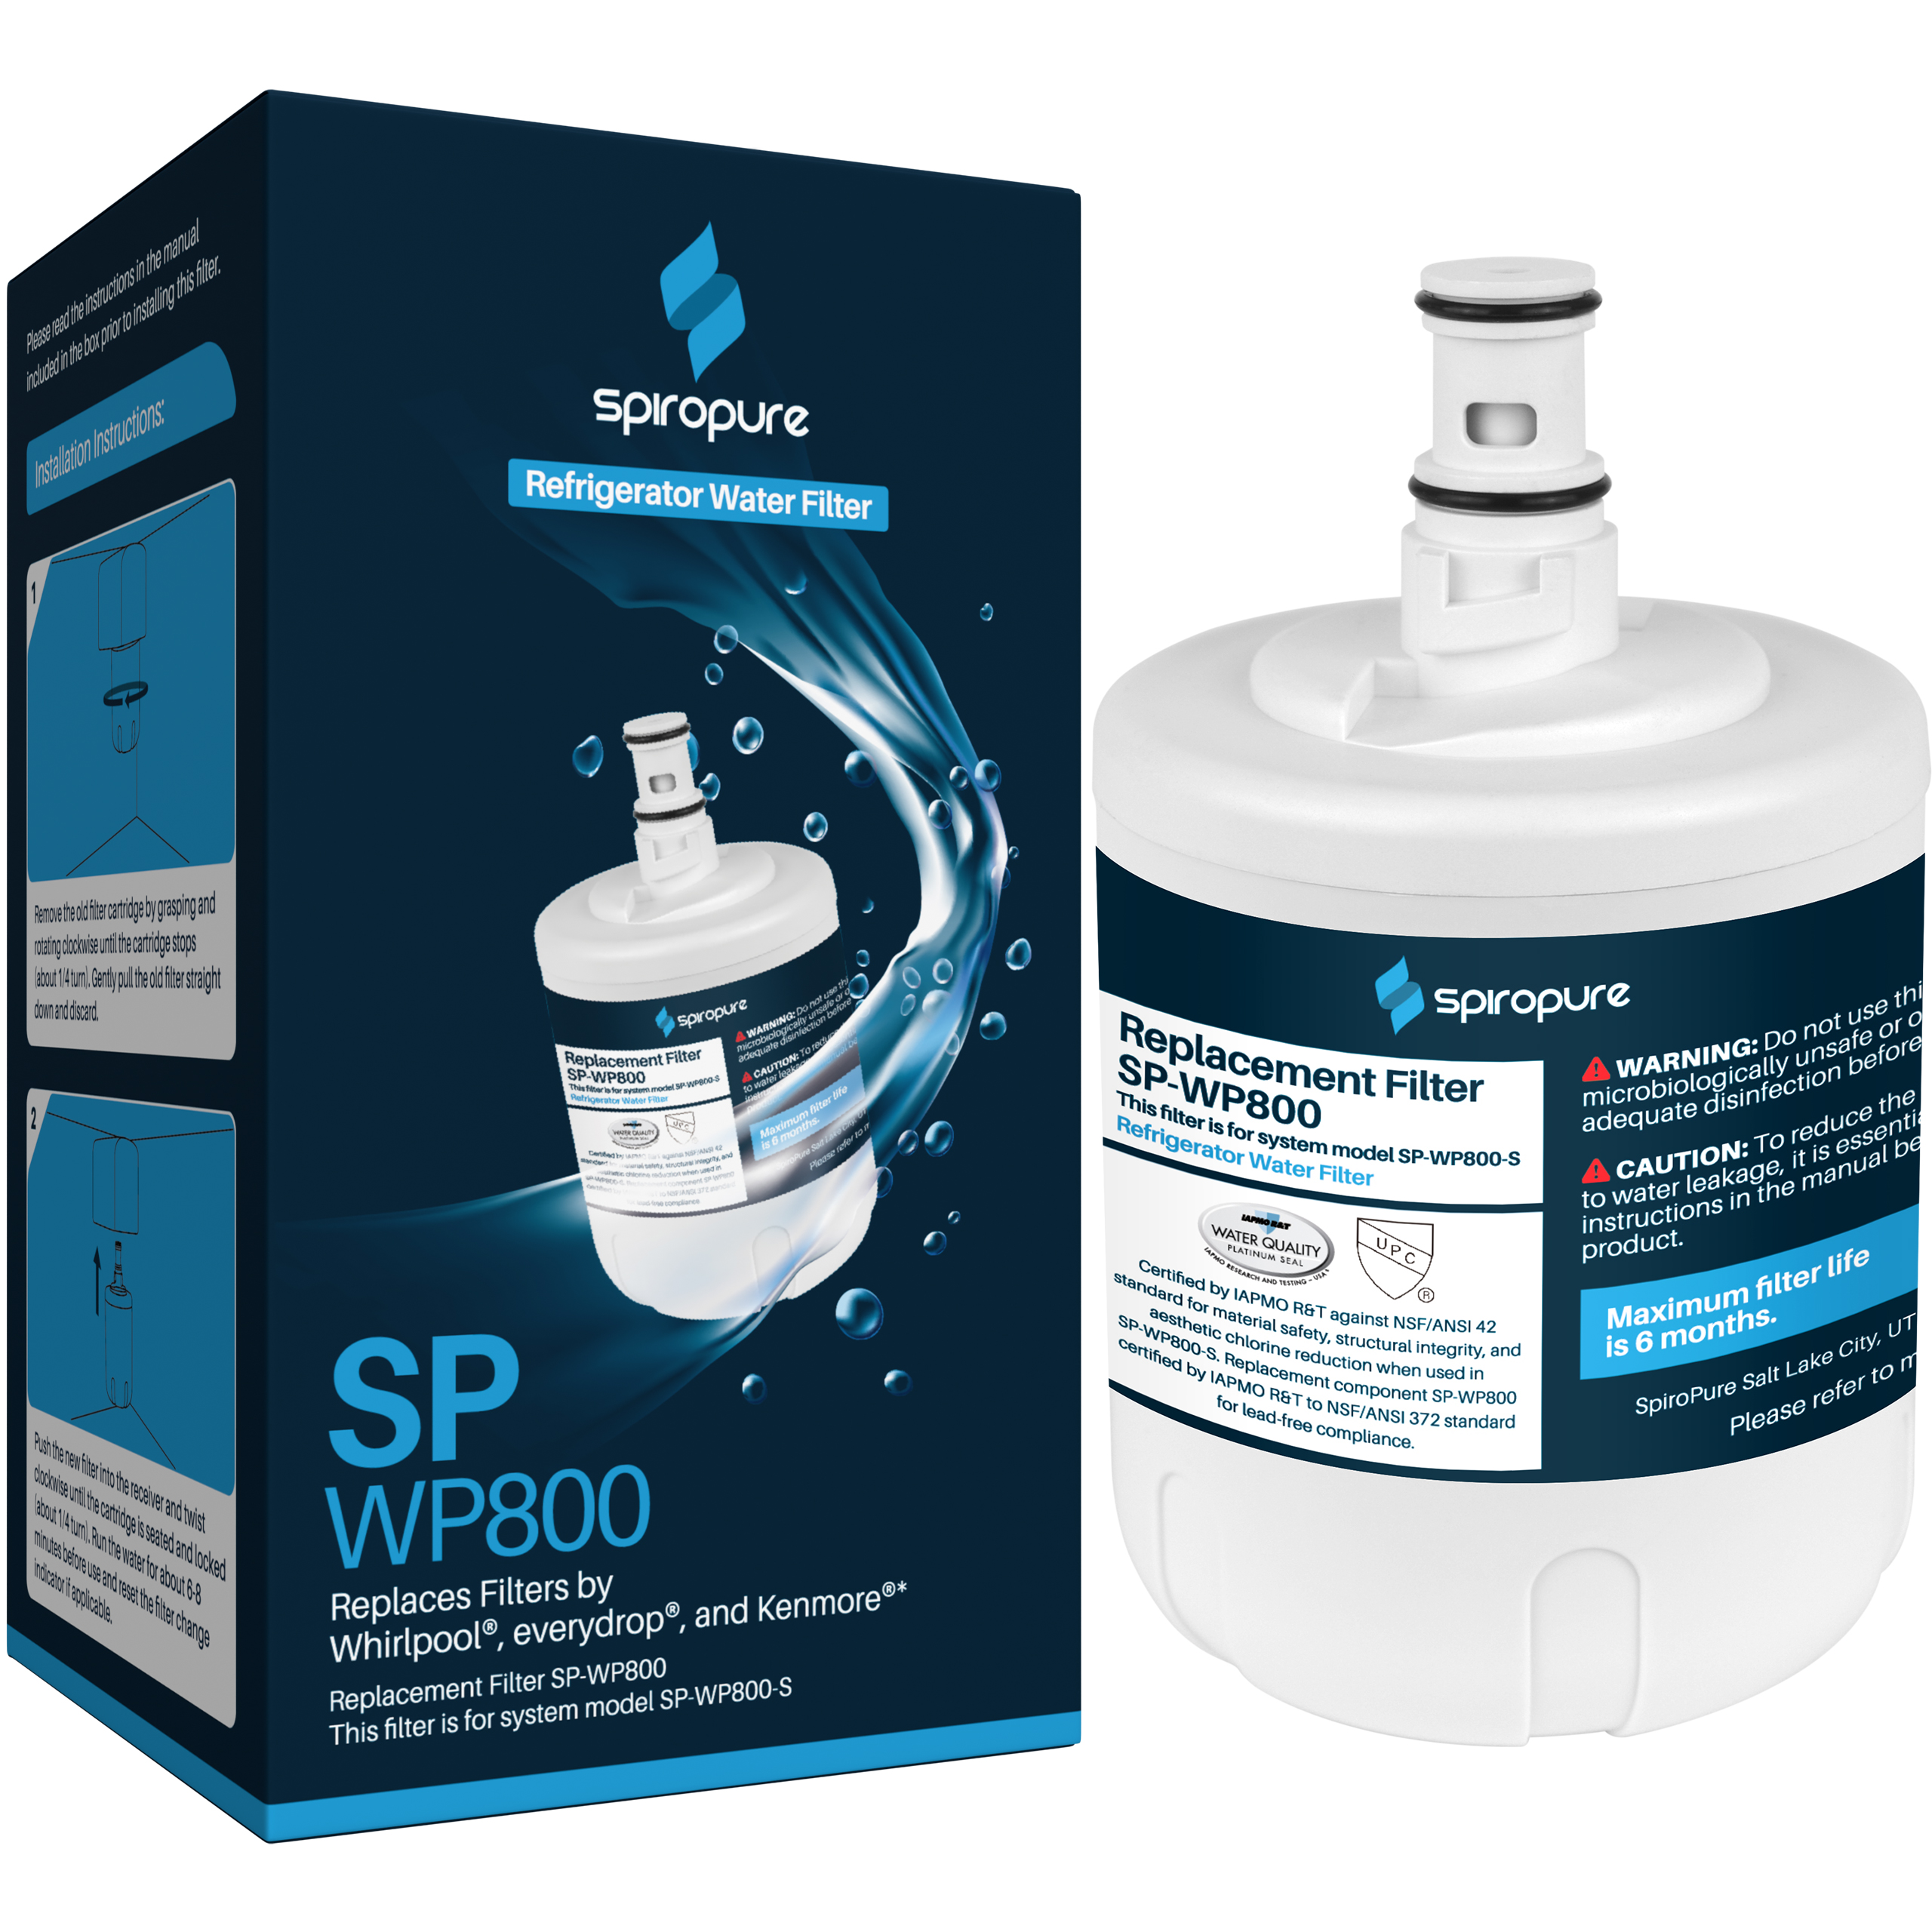 NEW Whirlpool EveryDrop Water and Ice Refrigerator Water Filter 8  EDR8D1 